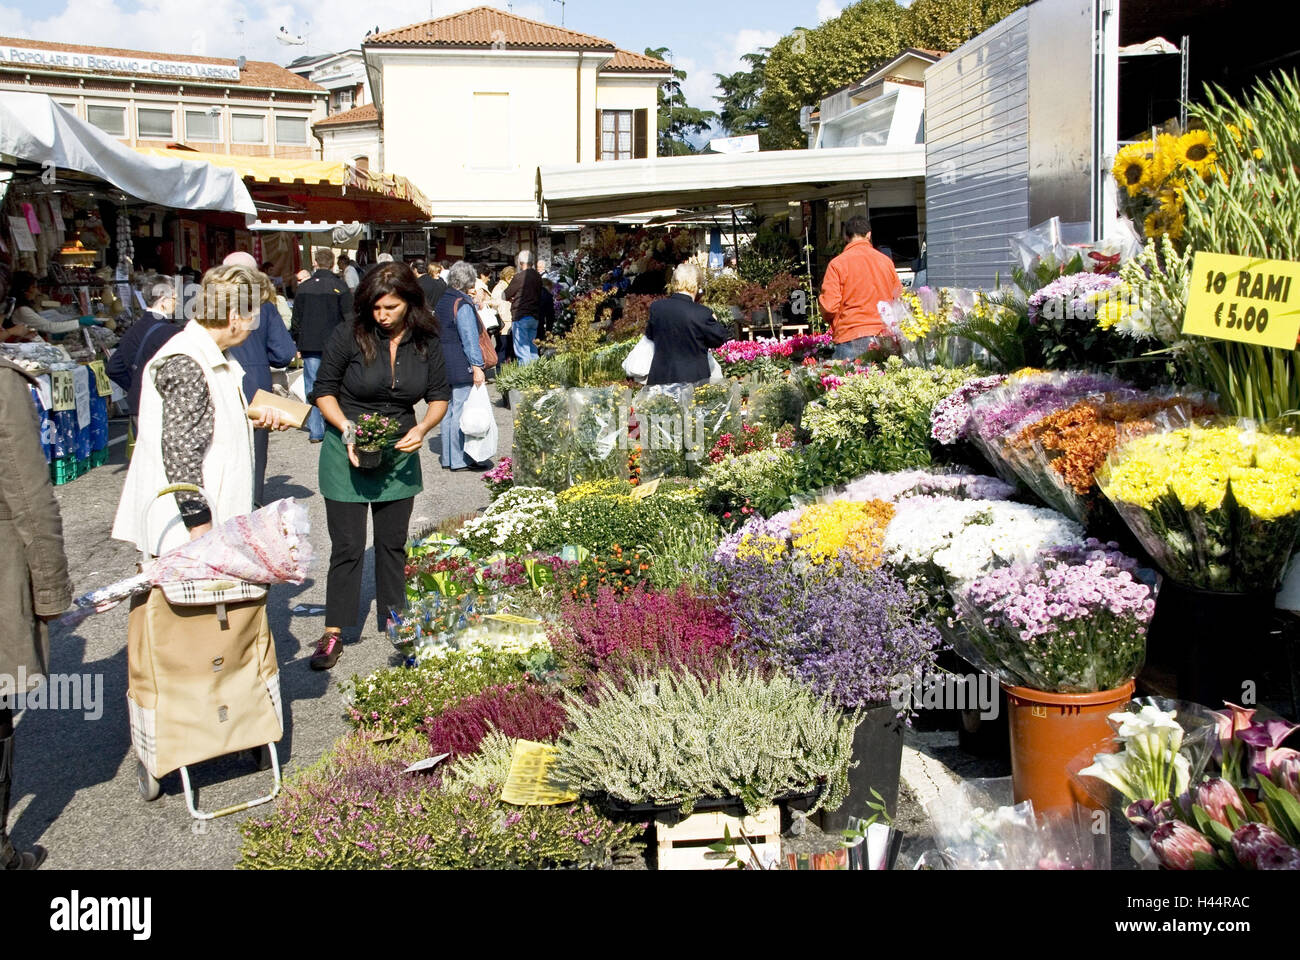 Italy, Northern Italy, Luino, market, flowers, passers-by, Stock Photo